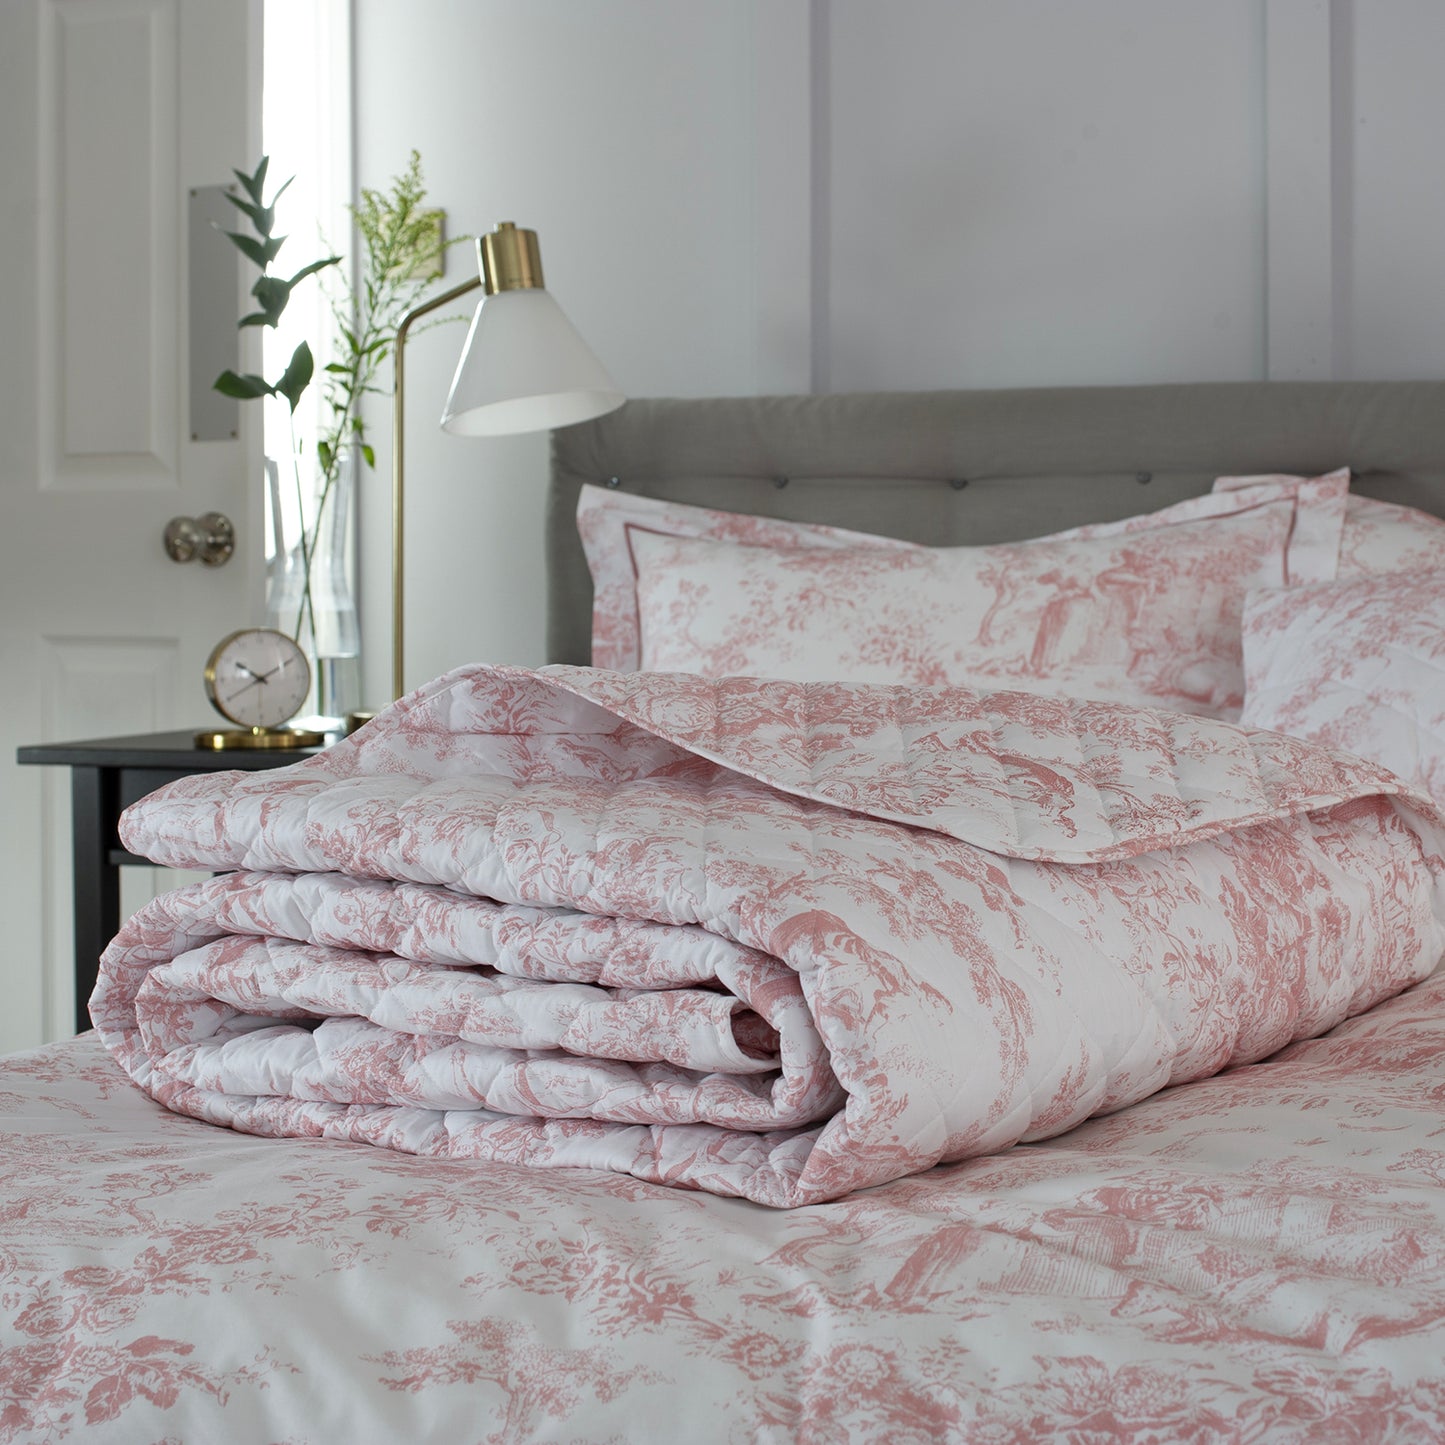 The Lyndon Company Toile Pink Printed Cotton Bedspread